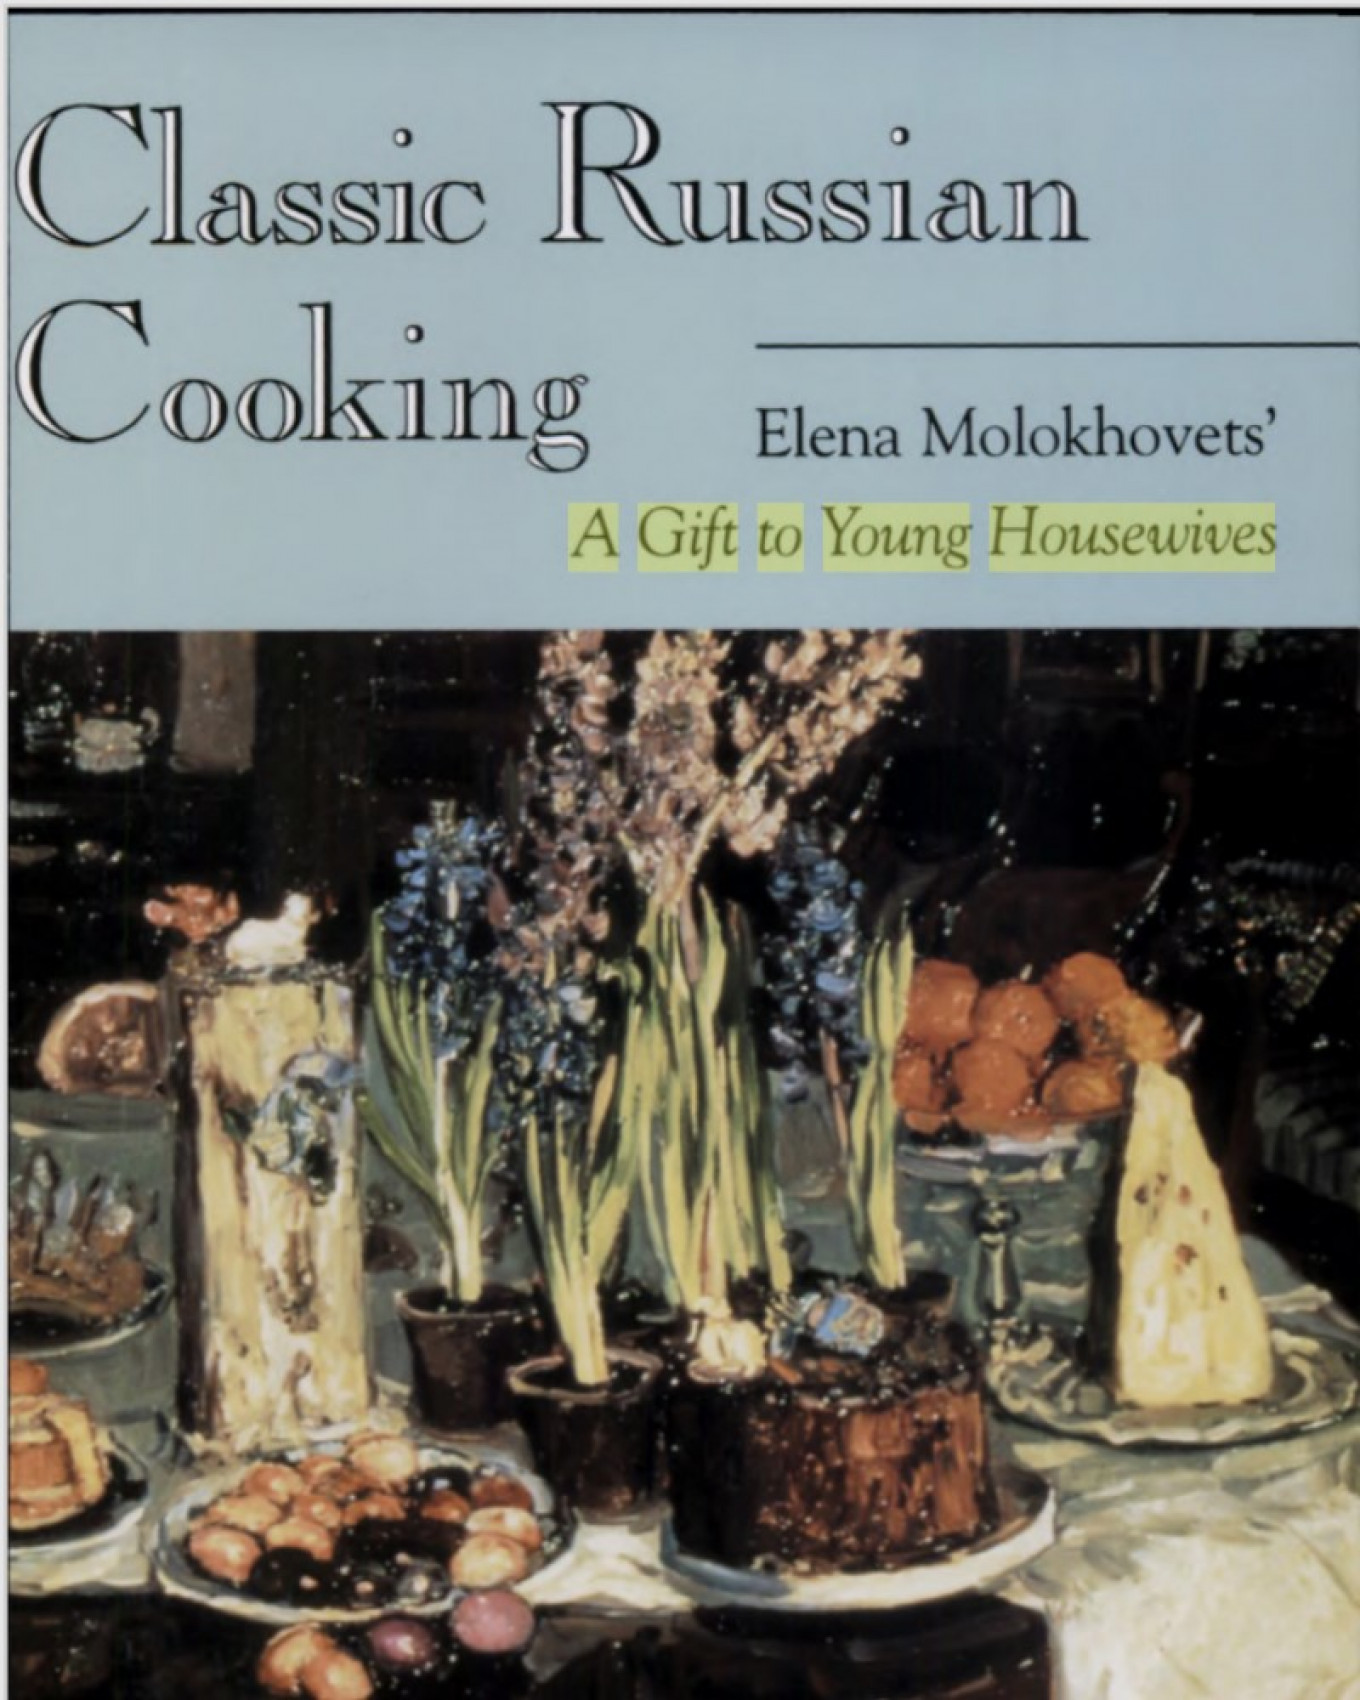 Into the Frying Pan: 9 Top Russian Cookbooks